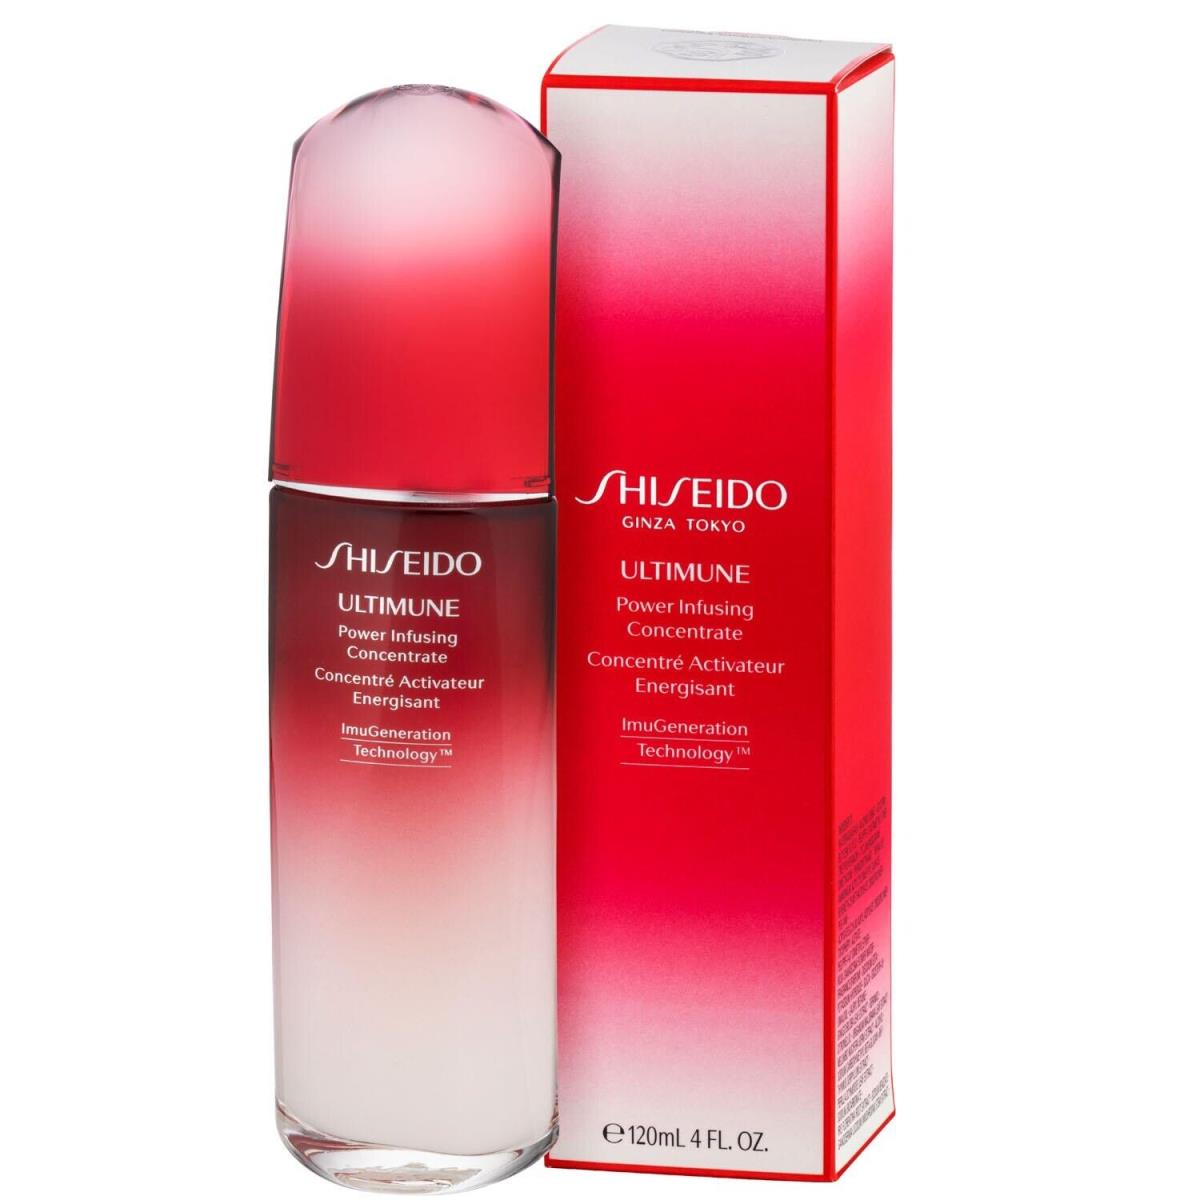 Shiseido Ultimune Power Infusing Concentrate 4oz - 120ml